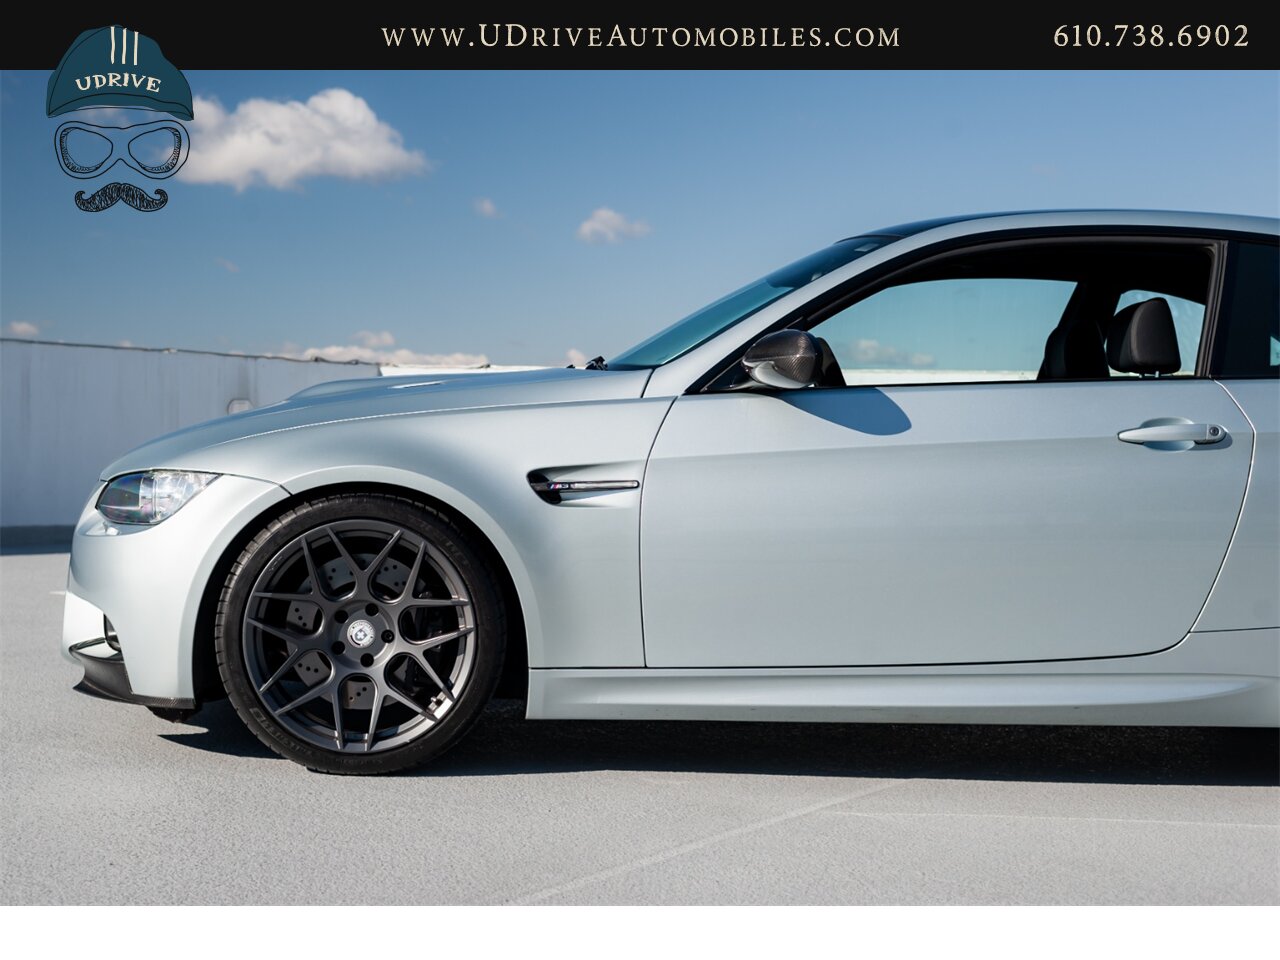 2008 BMW M3 Dinan S3-R M3 1 of 36 Produced DCT  1 Owner Full Service History 4.6L Stroker V8 - Photo 8 - West Chester, PA 19382